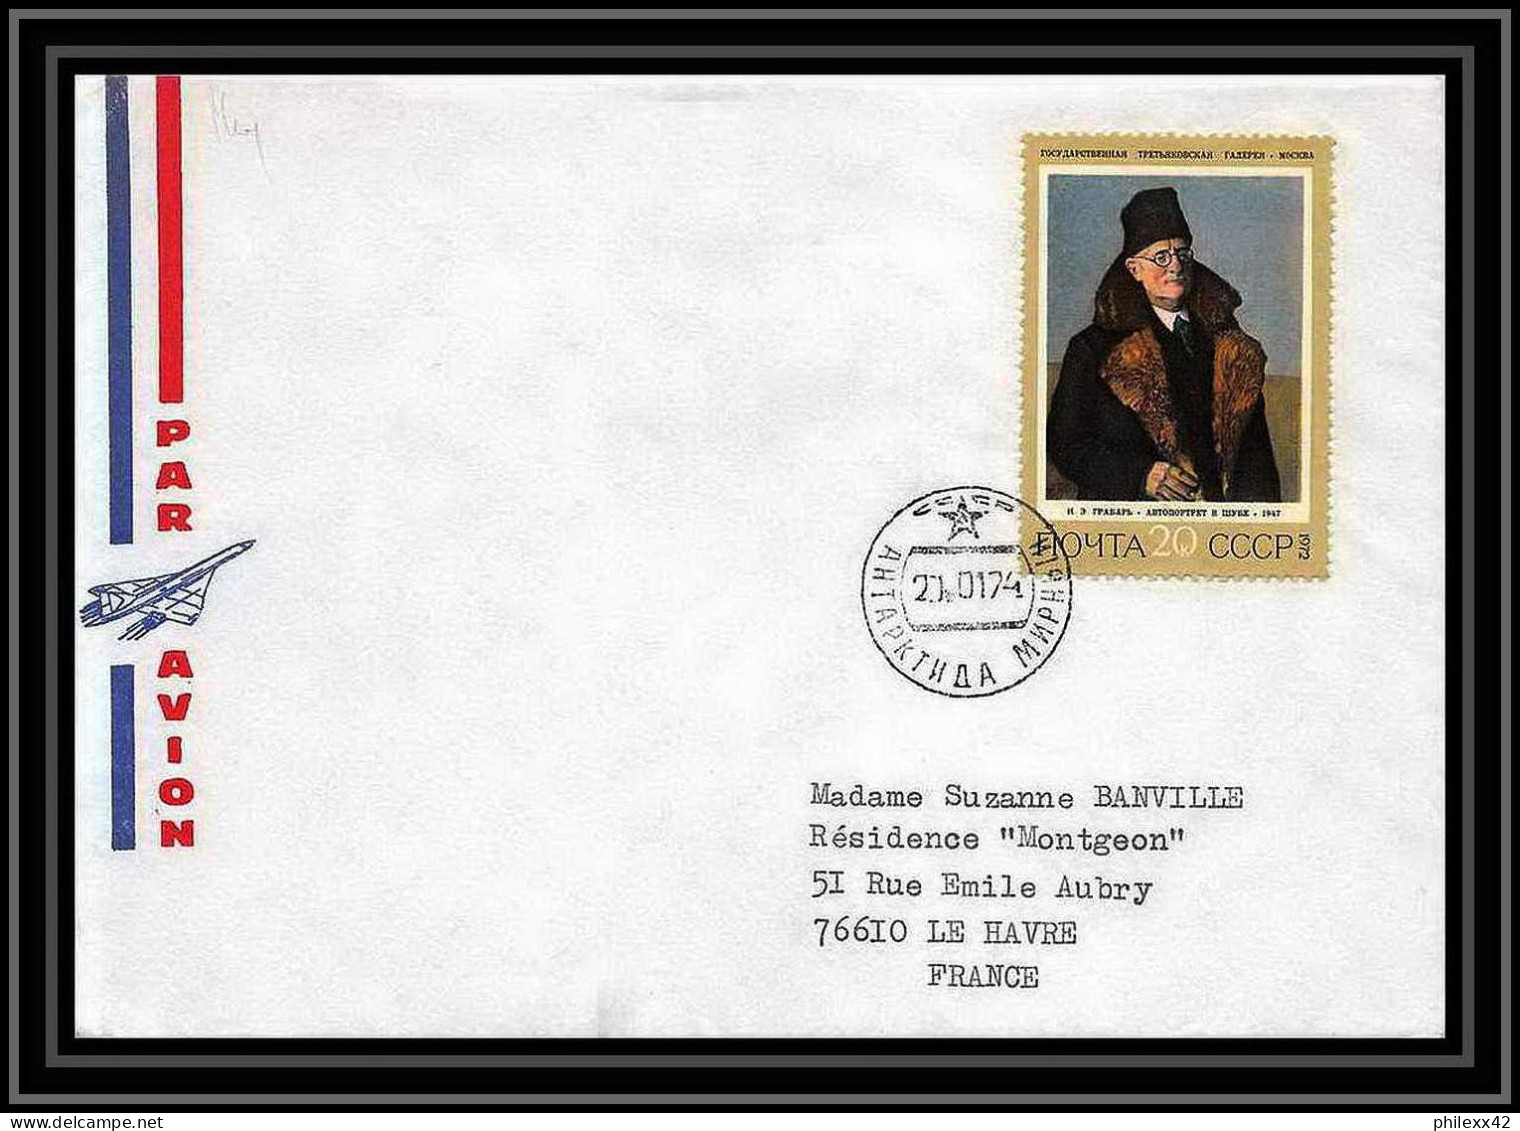 2035 Antarctic Russie (Russia Urss USSR) Lettre (cover) 27/01/1974 - Research Stations